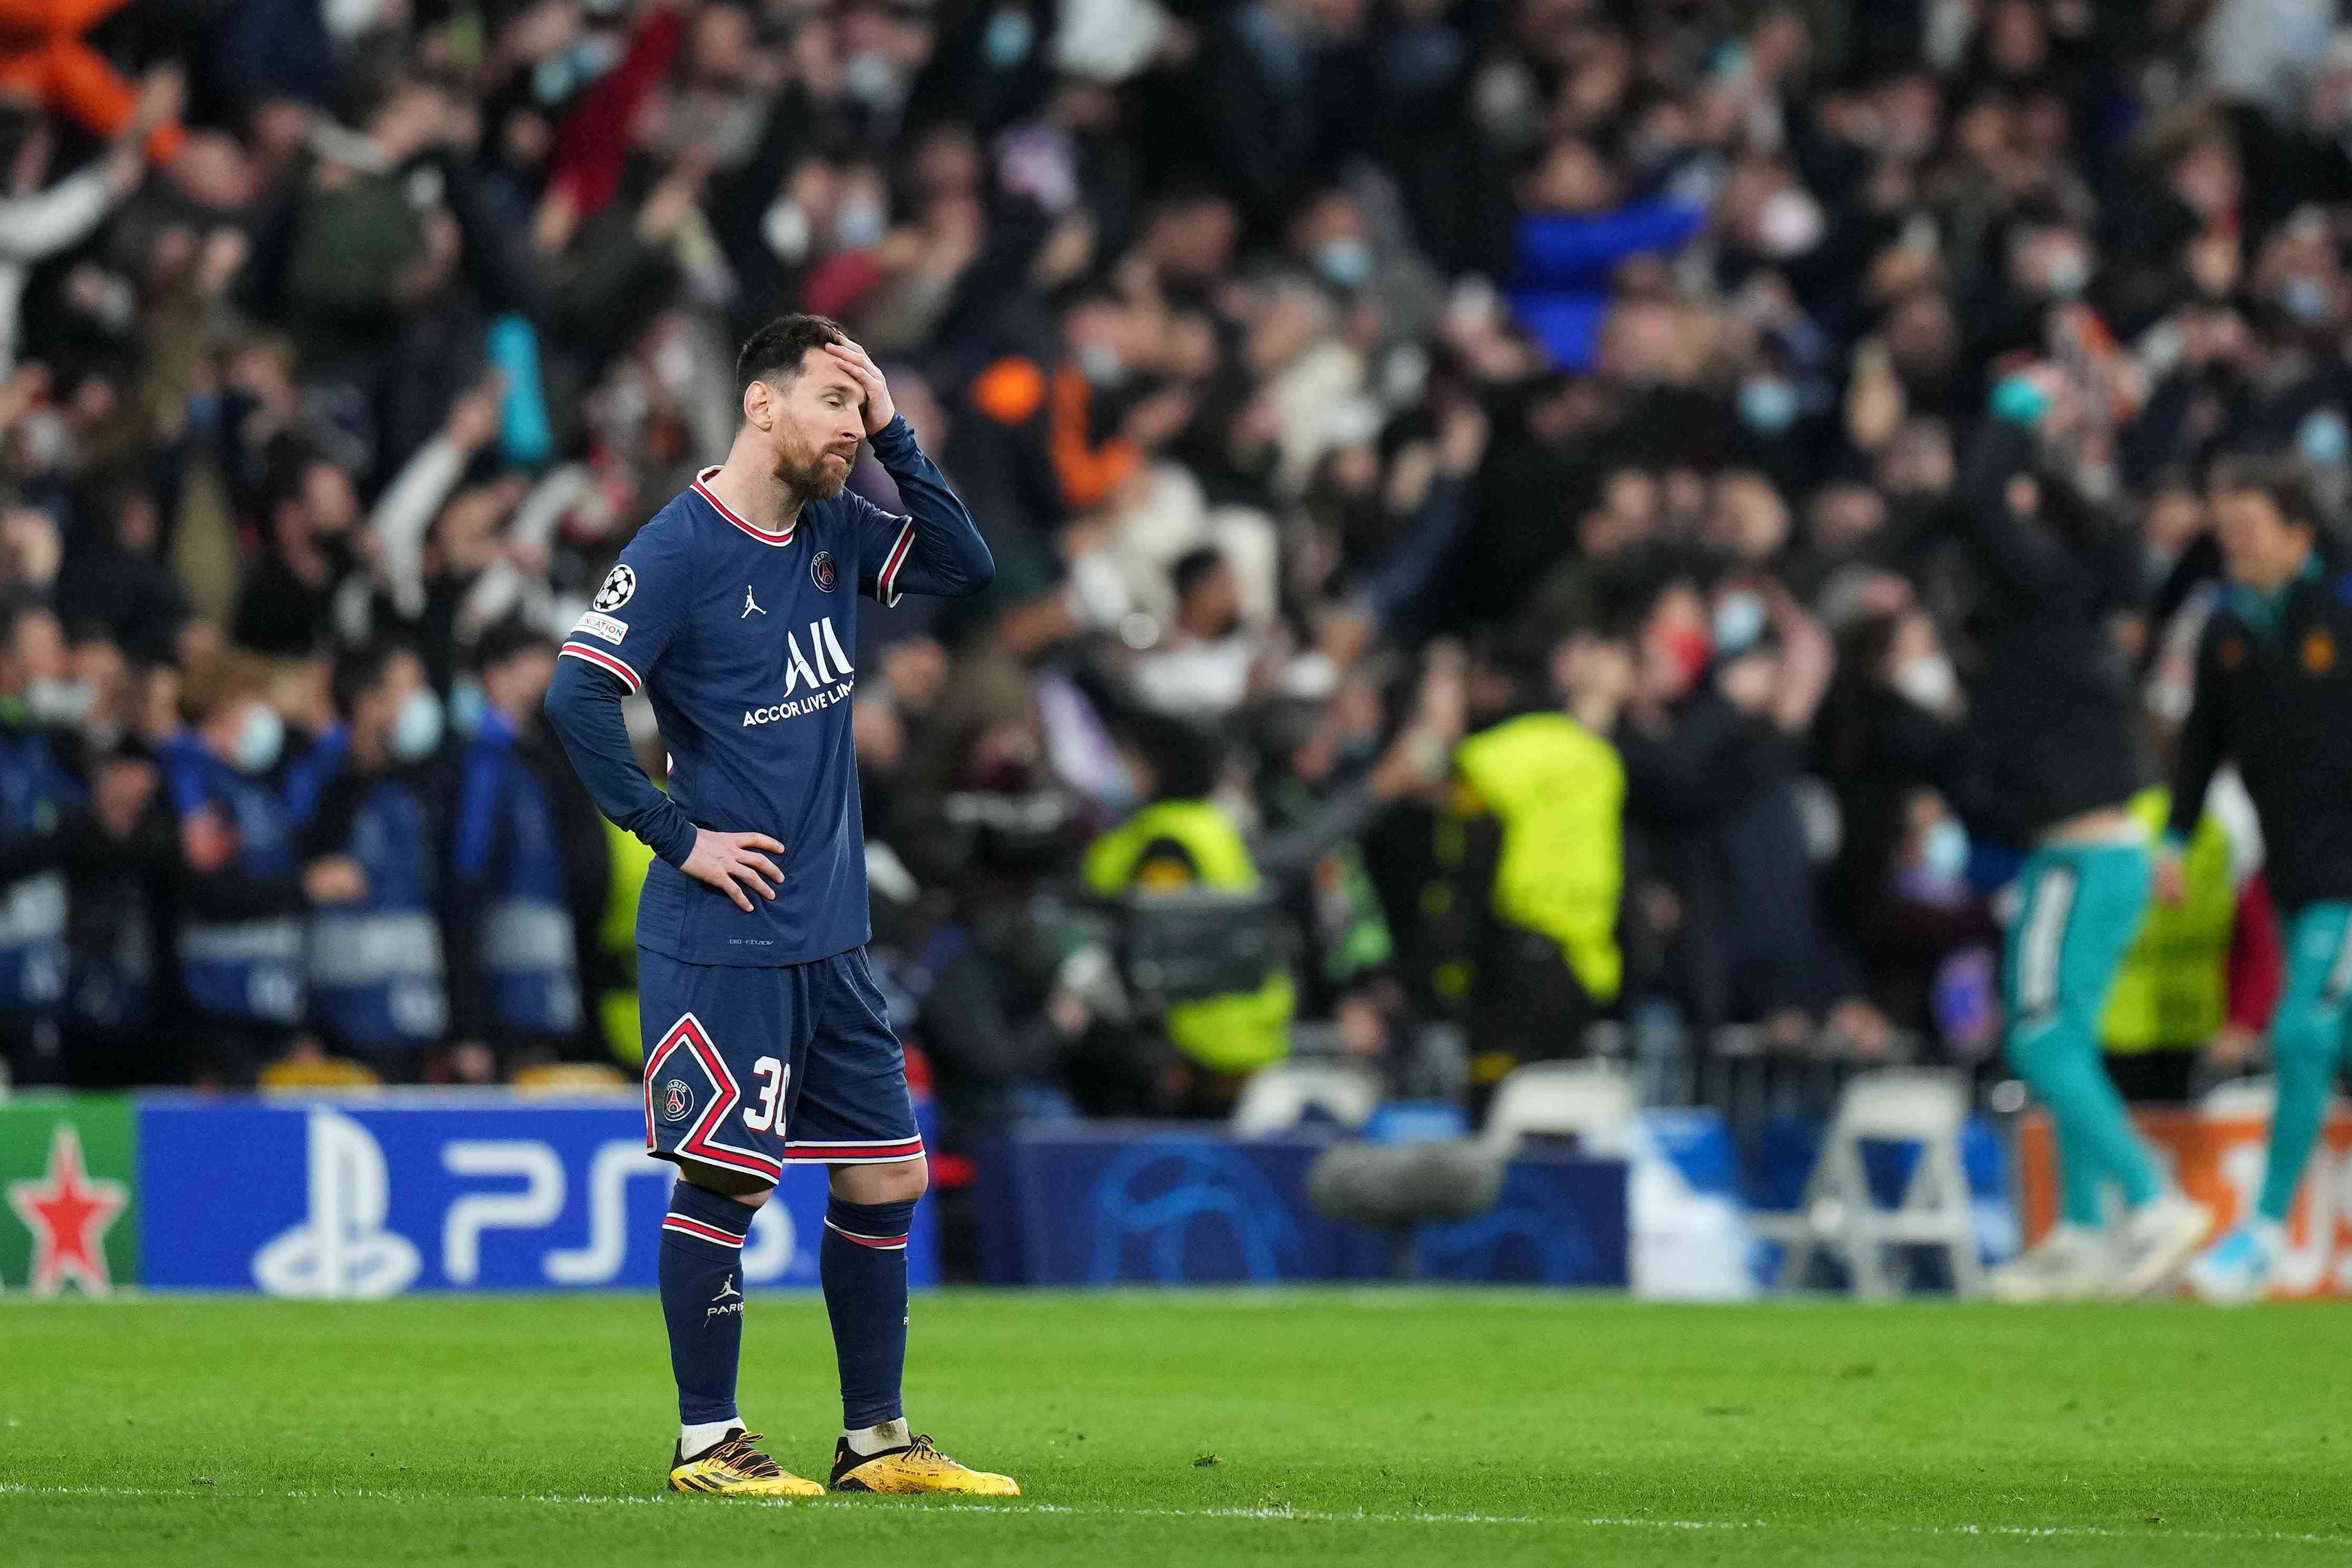 https://allnewspress.com/wp-content/uploads/2022/03/1646883498_108_The-ratings-of-PSG-players-against-Real-Madrid-Donnarumma-weighed.jpg